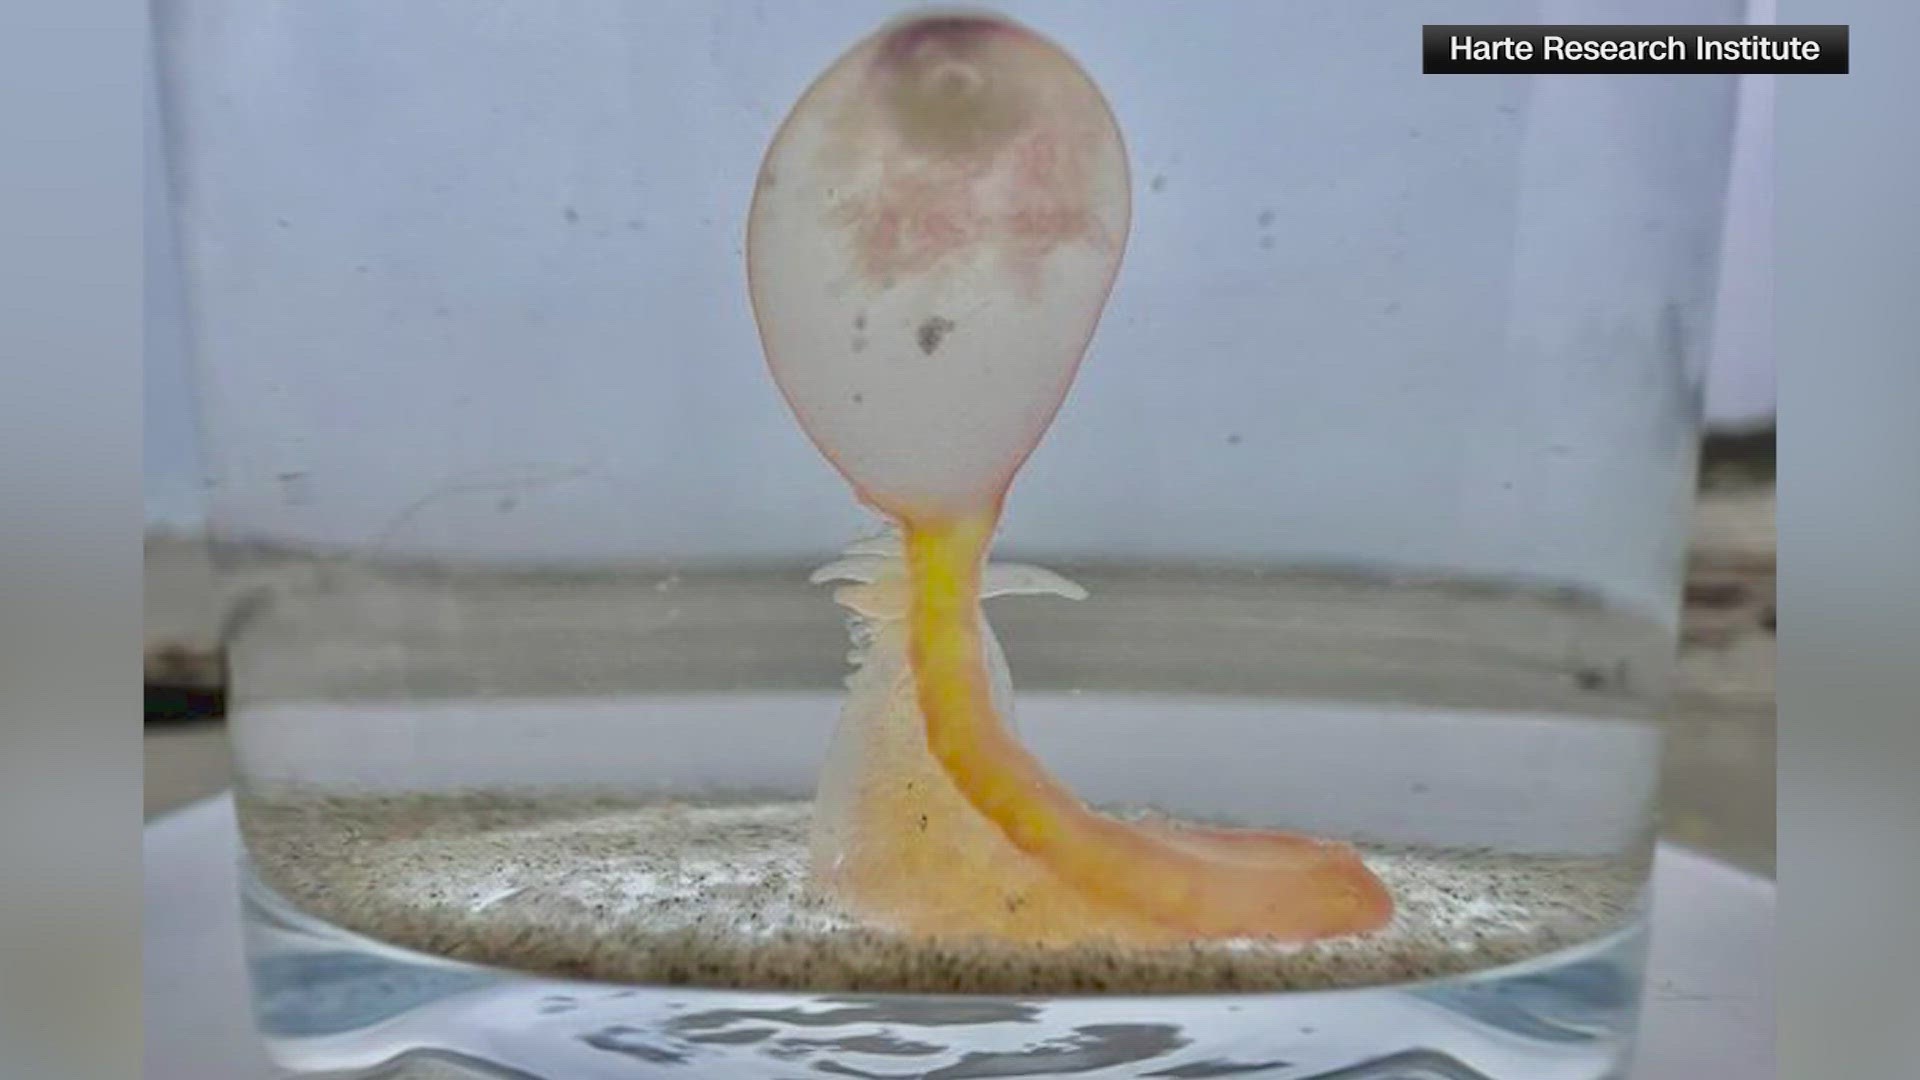 There have been reports of creatures that look like aliens washing up on Mustang Island near Corpus Christi.